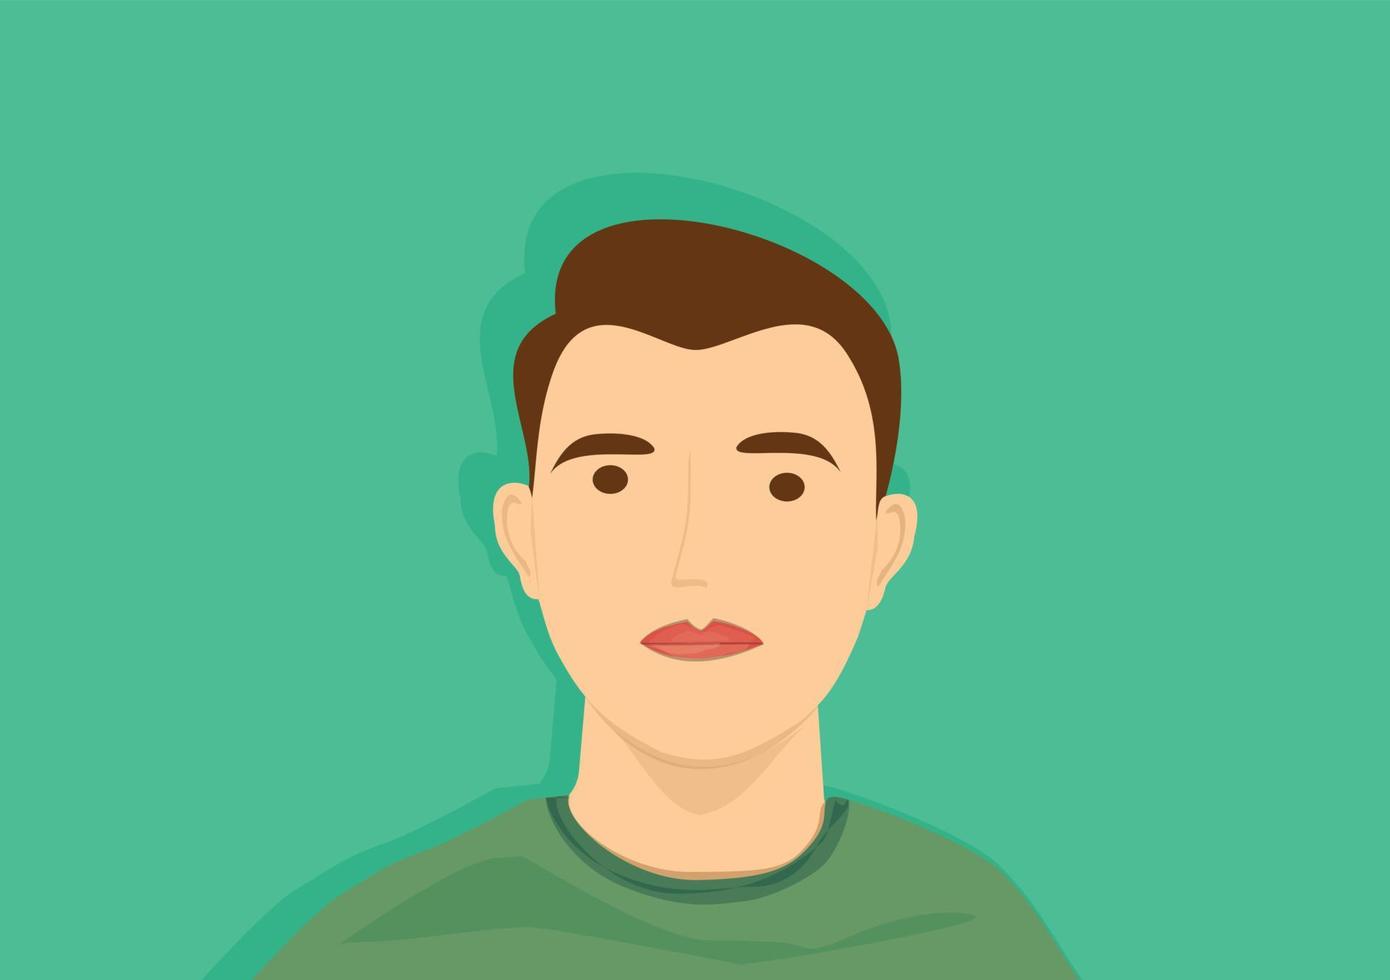 male looking, confused, asking, flat design. green background vector